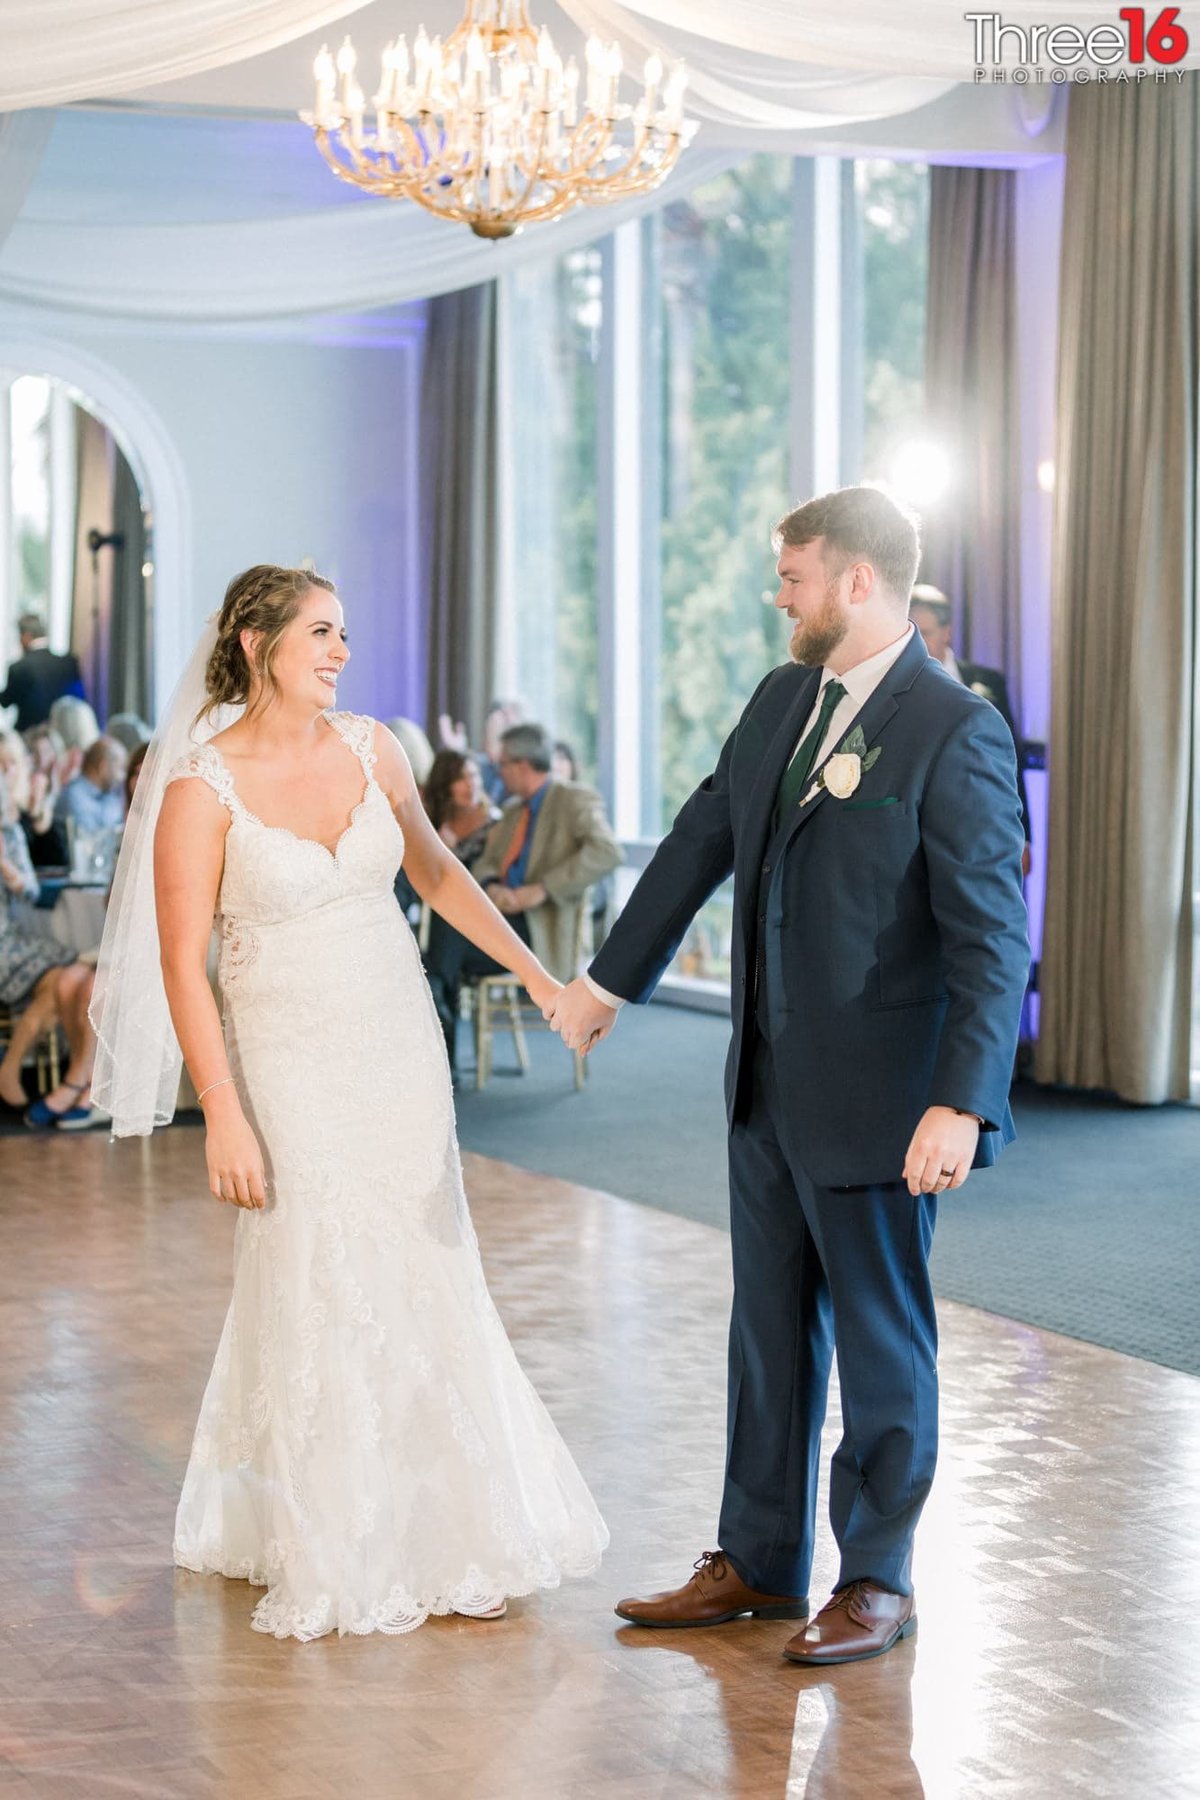 Bride and Groom take the dance floor for their first dance